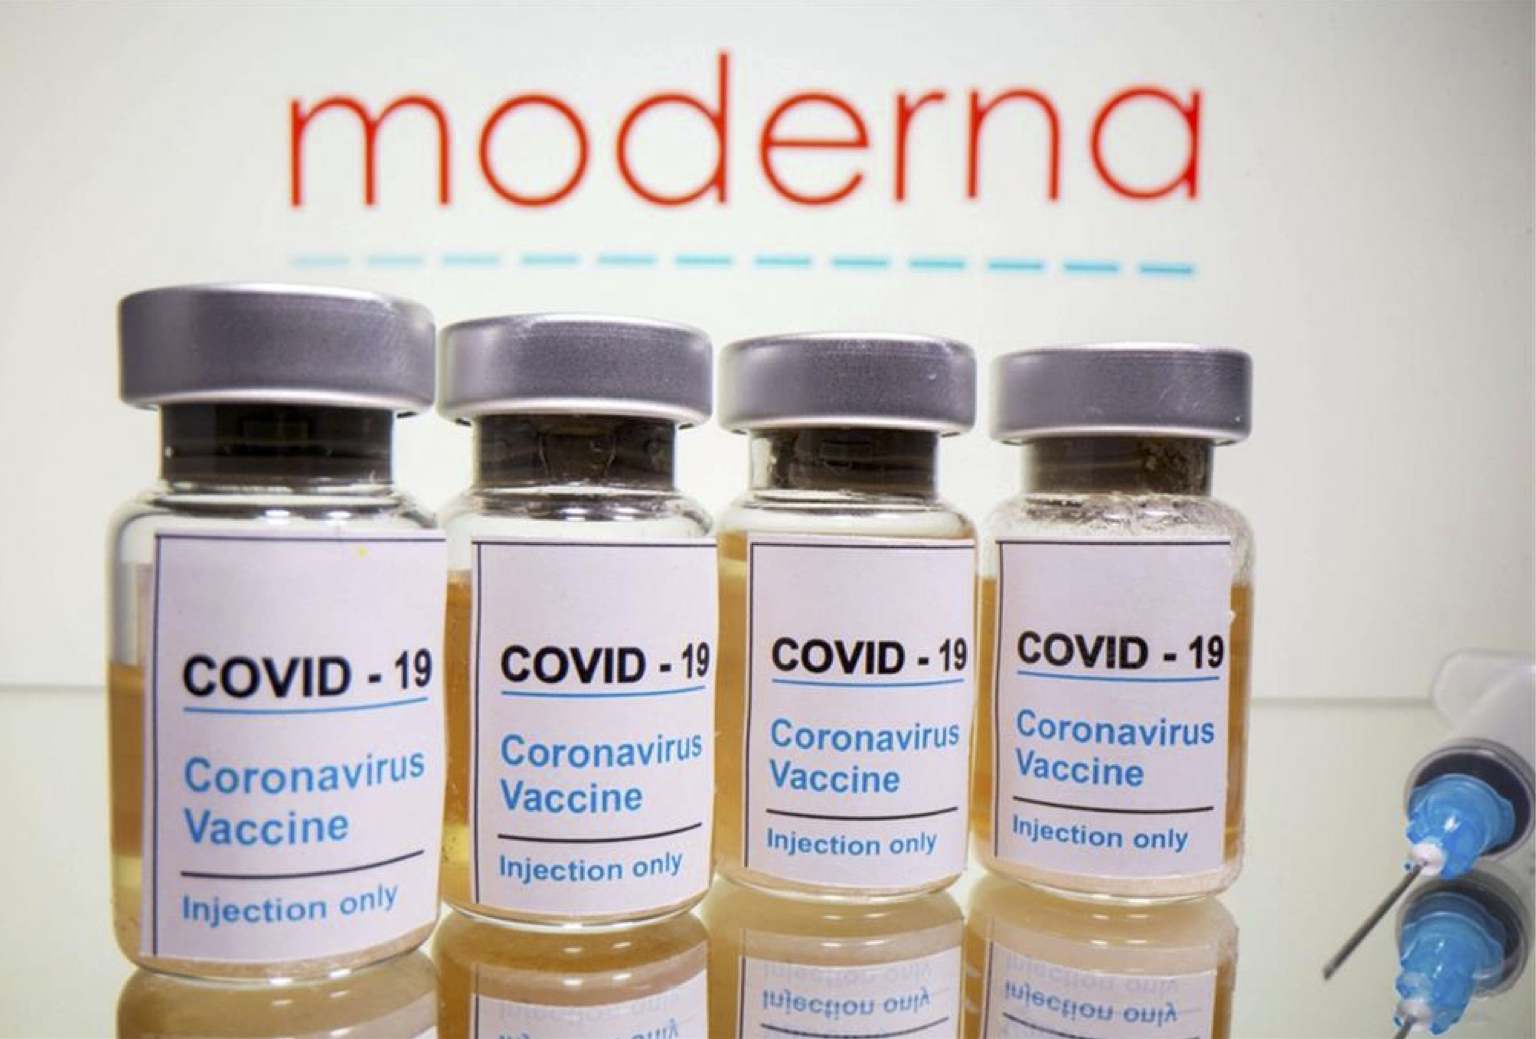 Pharmacist who tampered with Covid-19 vaccines after claiming they could alter people’s DNA receives 3yr jail sentence